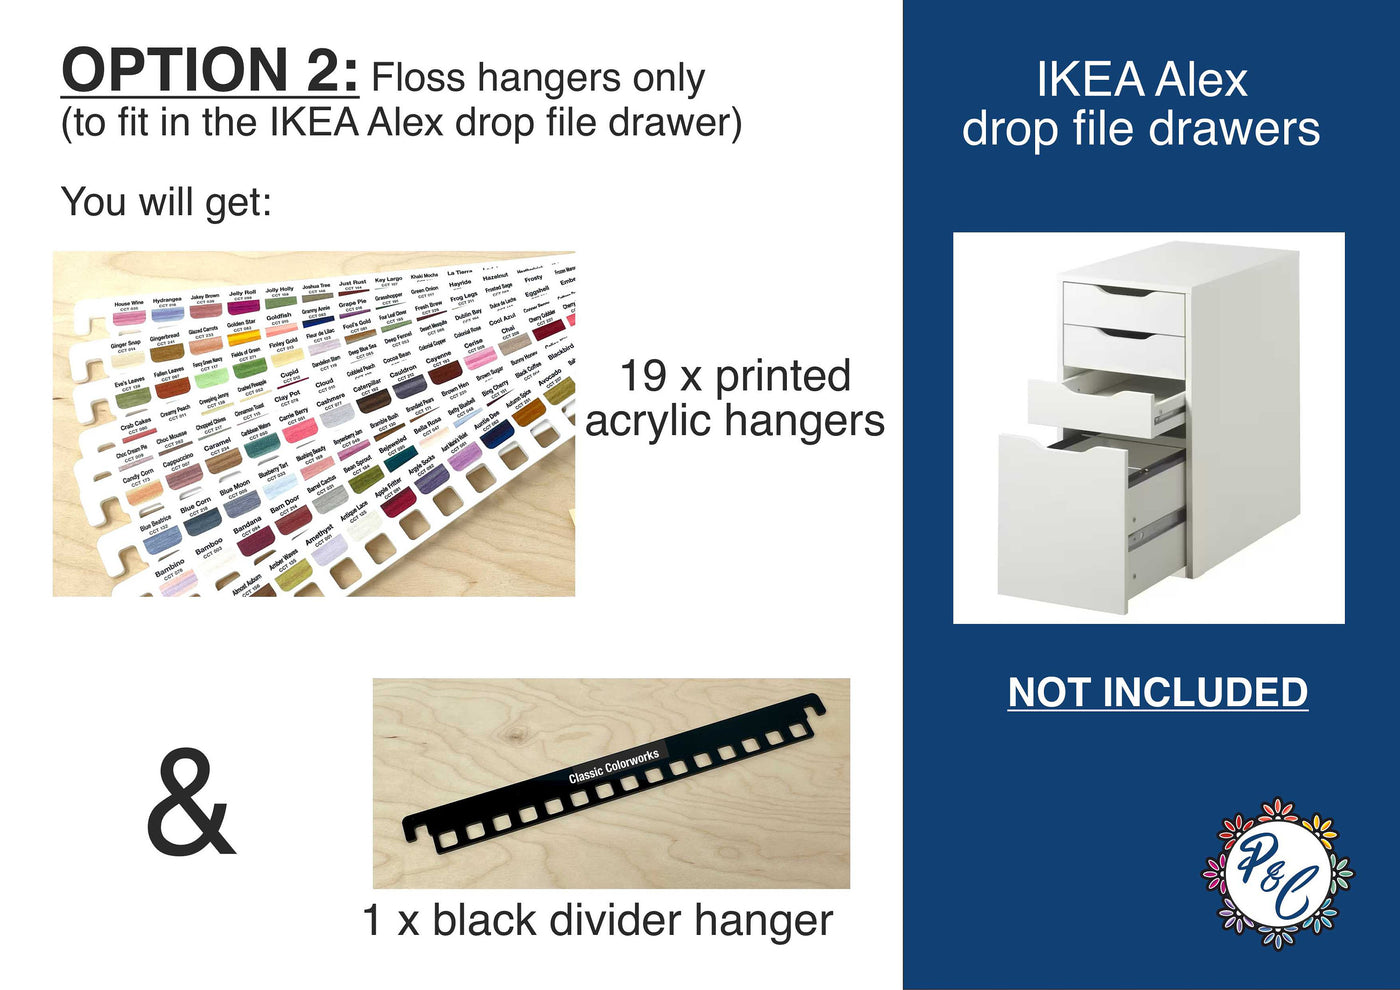 Classic Colorworks Floss hangers with x272 printed swatches - x19 acrylic hangers | NO floss or storage included